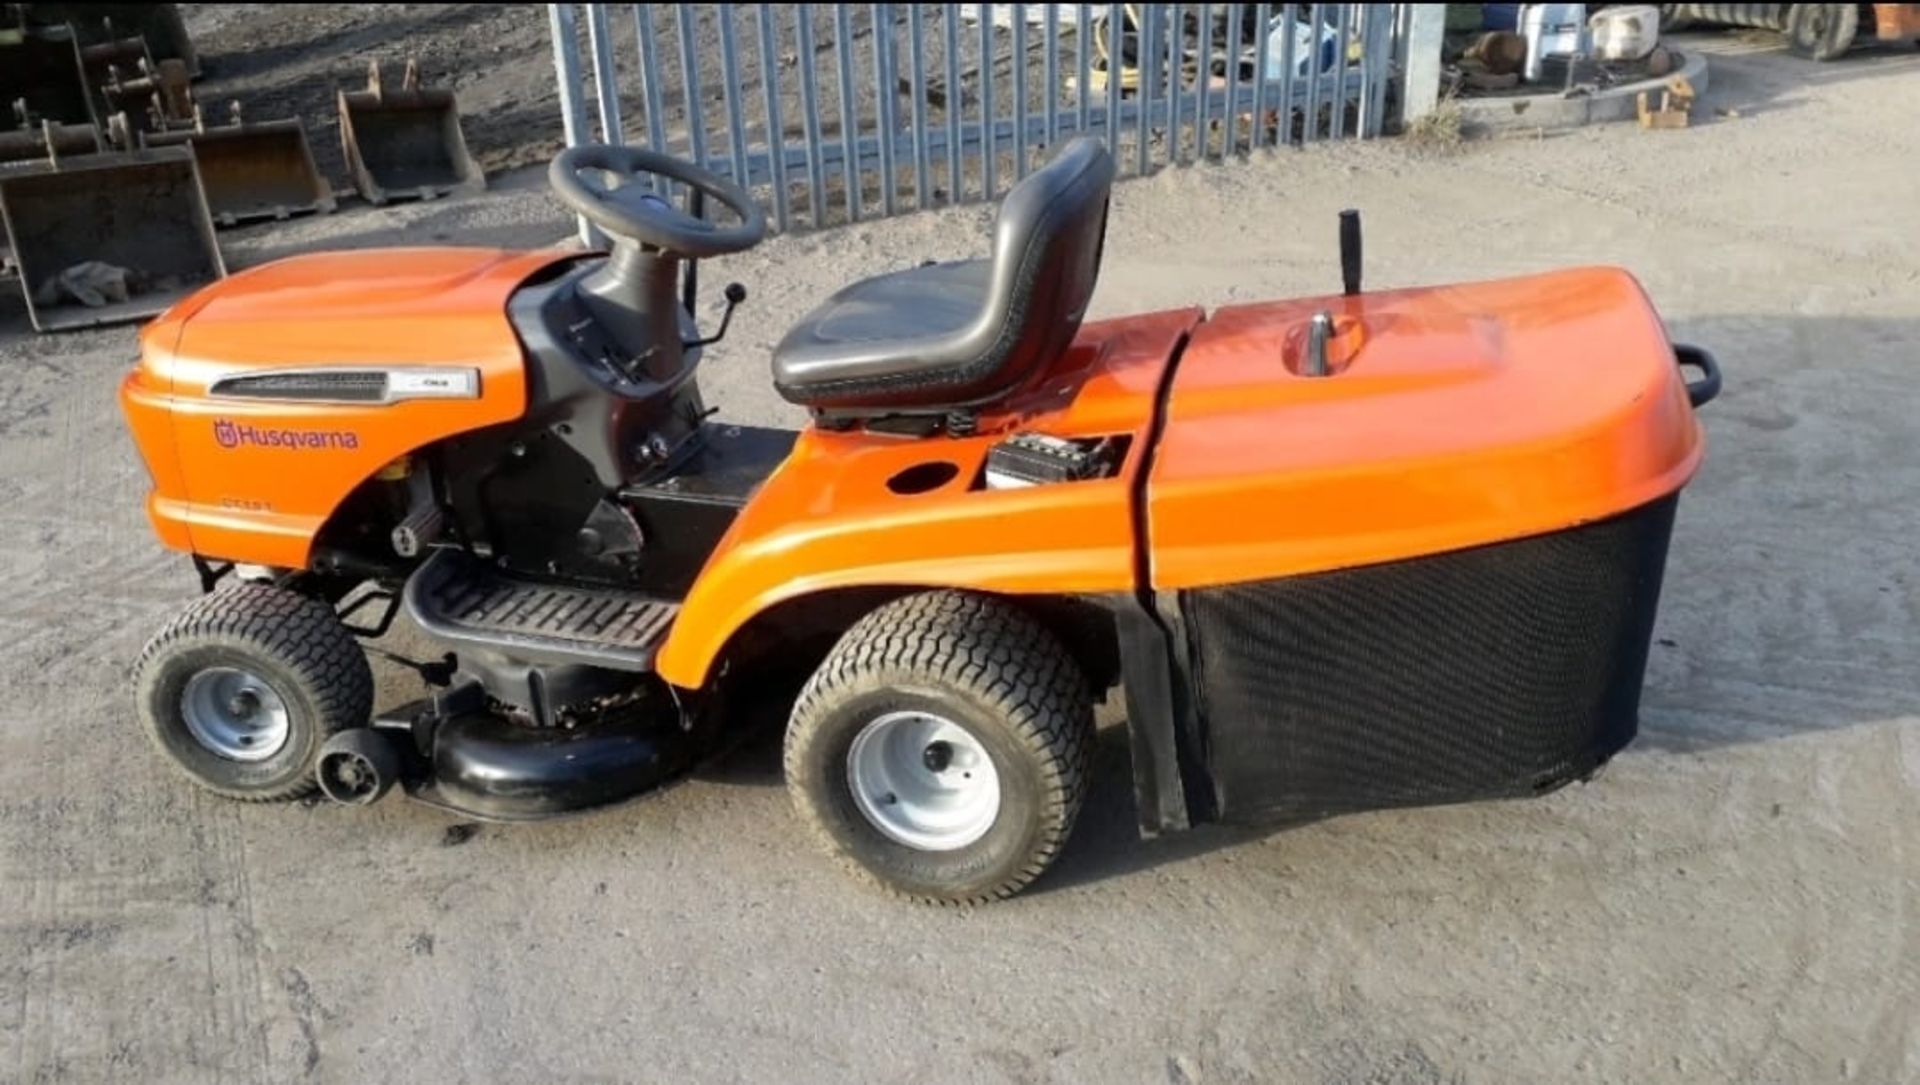 2006 HUSQVARNA CT151 PETROL WORKING ORDER, COMES WITH GRASS BOX *NO VAT* - Image 7 of 8